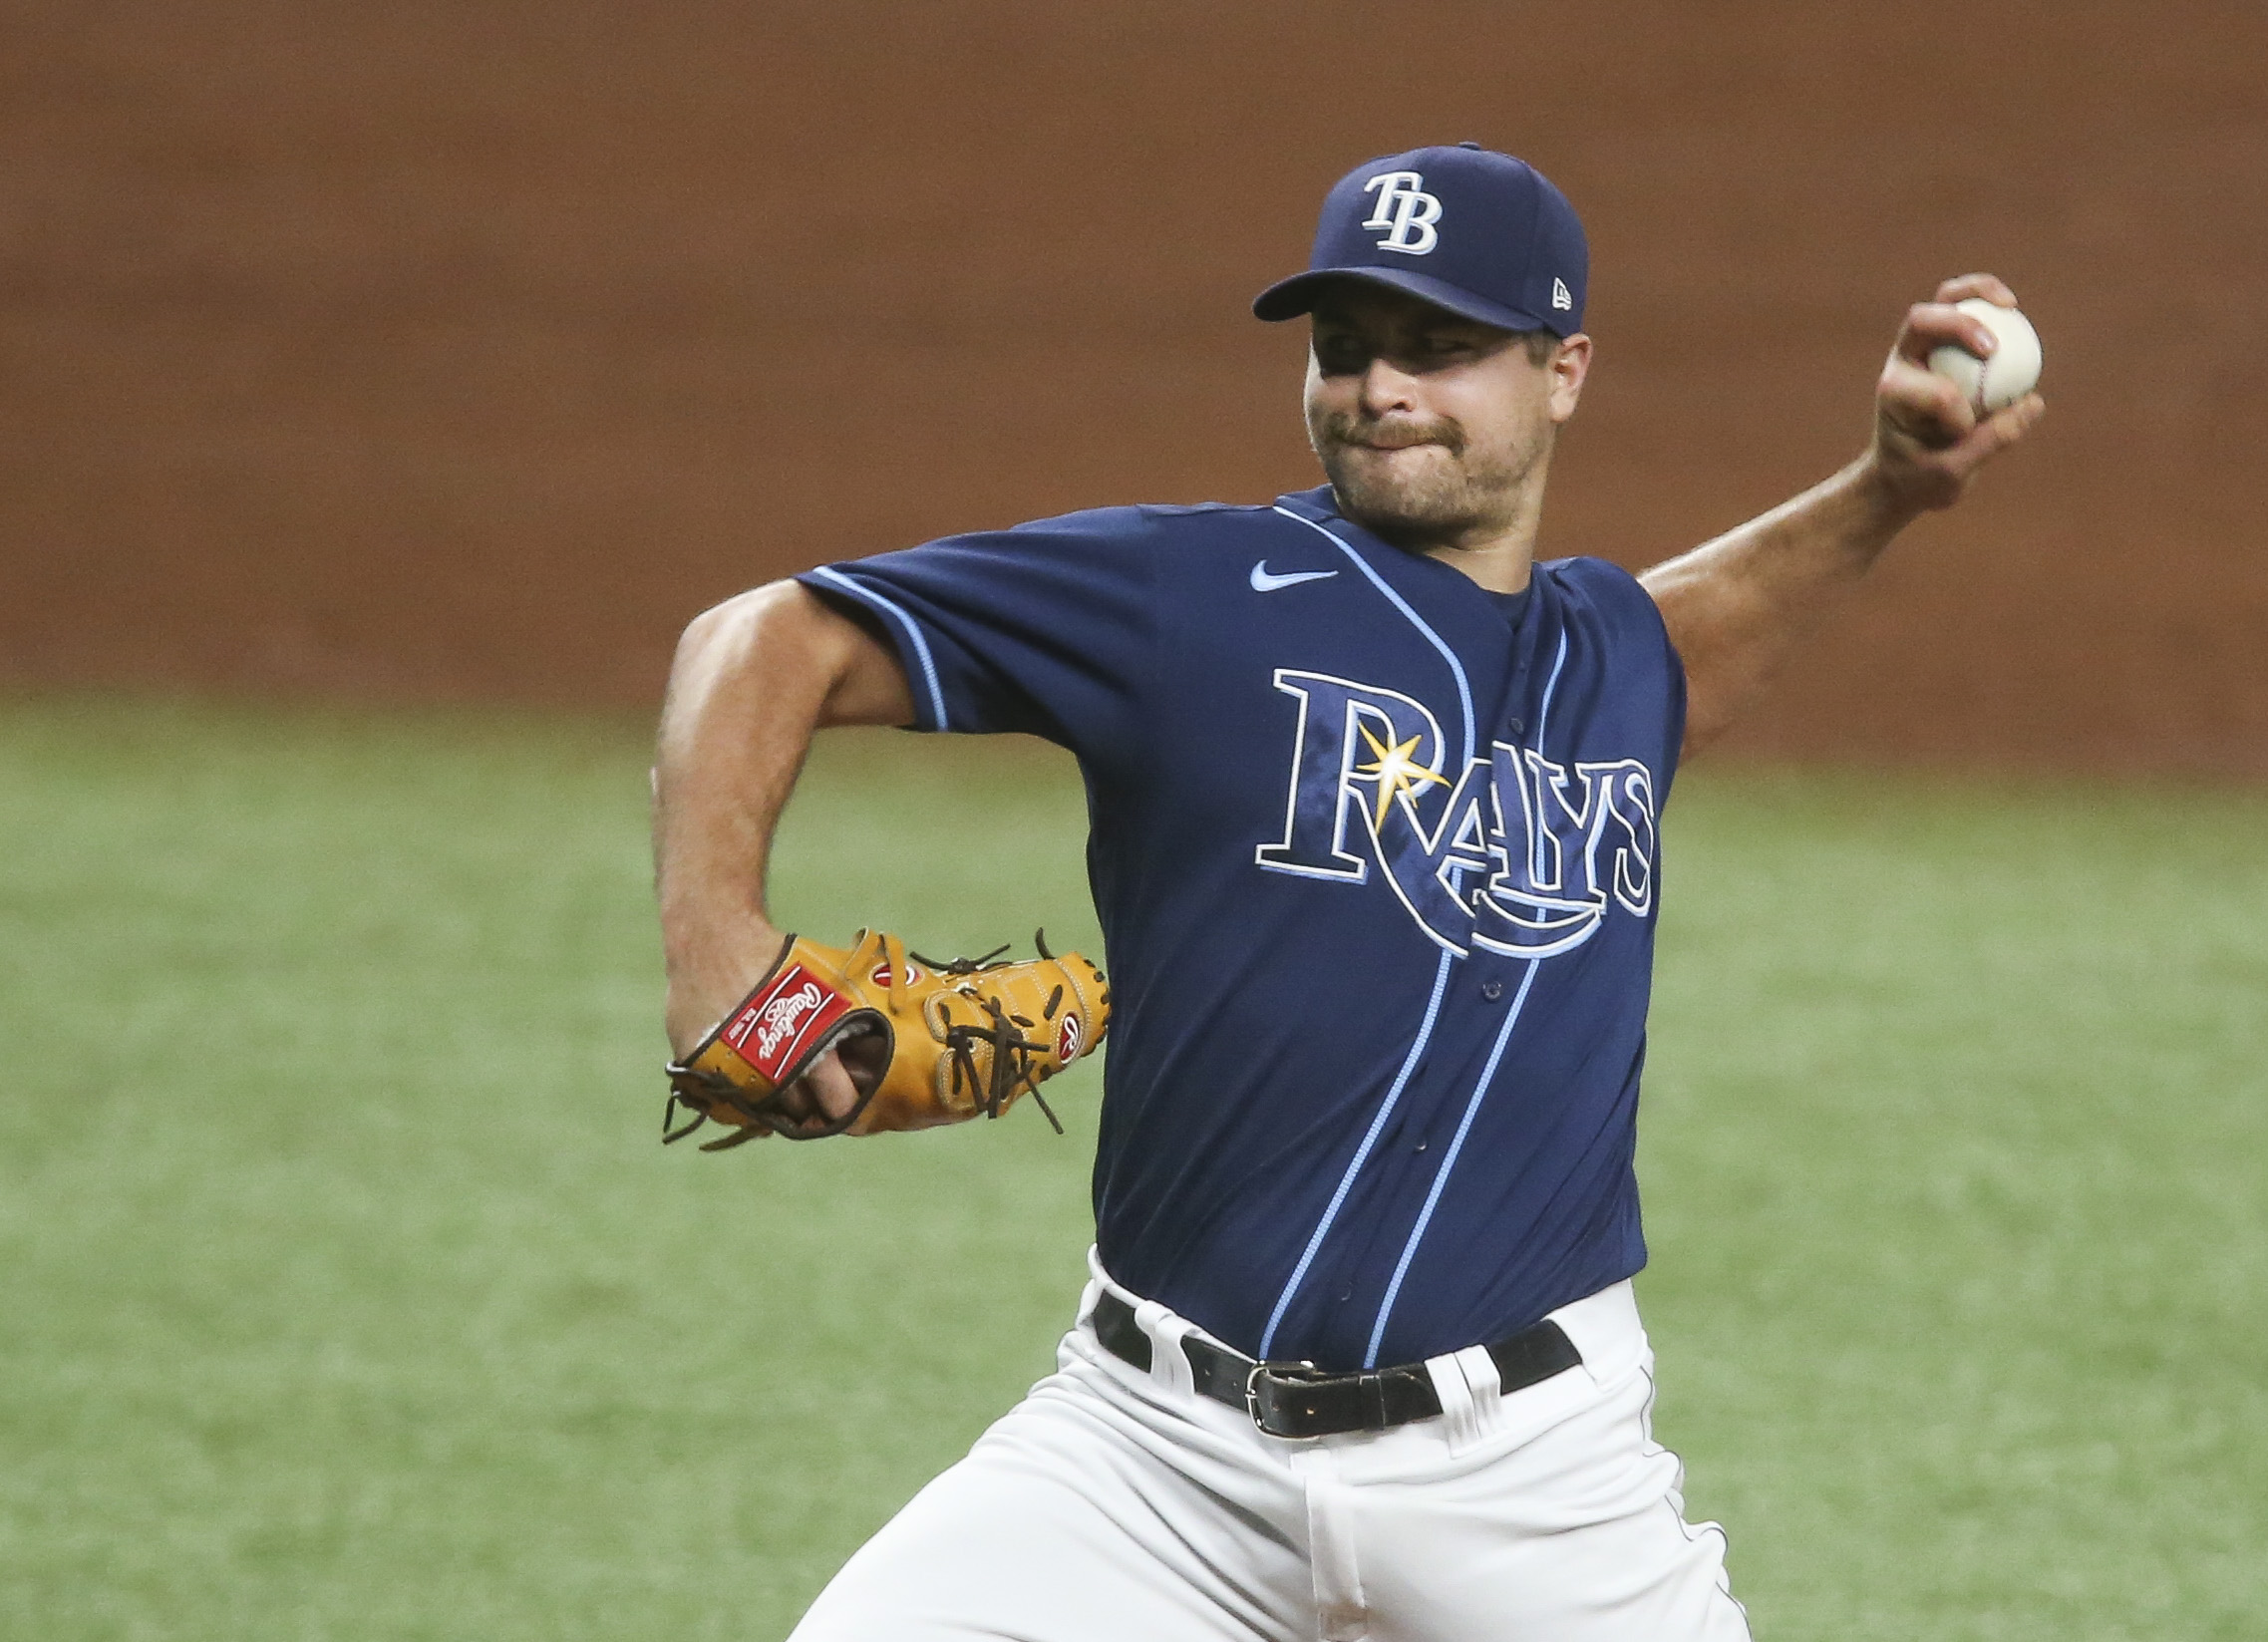 Jalen Beeks could be a key arm for the 2019 Tampa Bay Rays. Or not